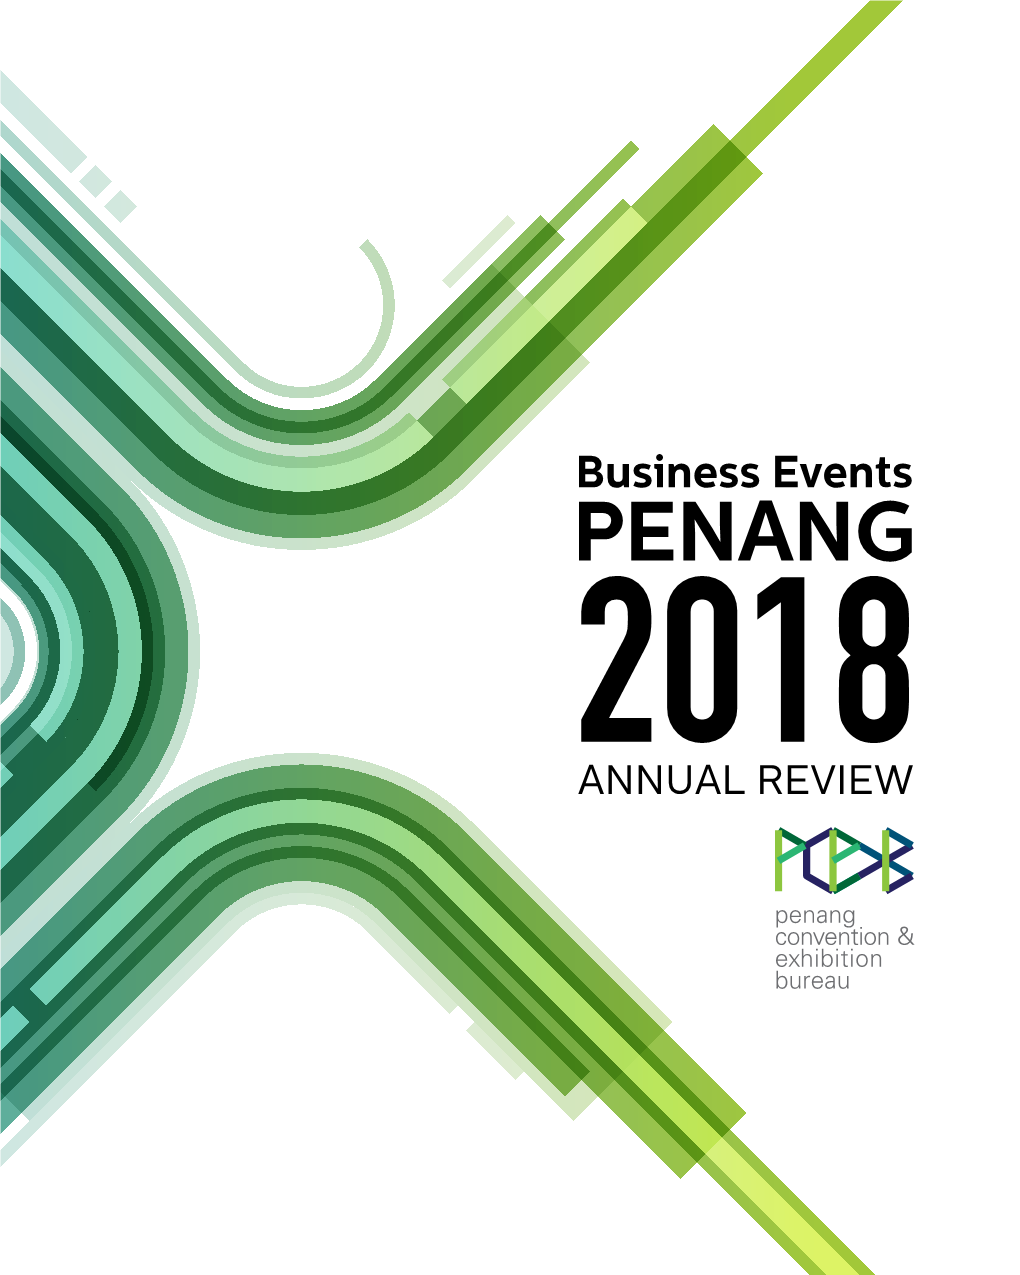 Download Our Annual Review 2018